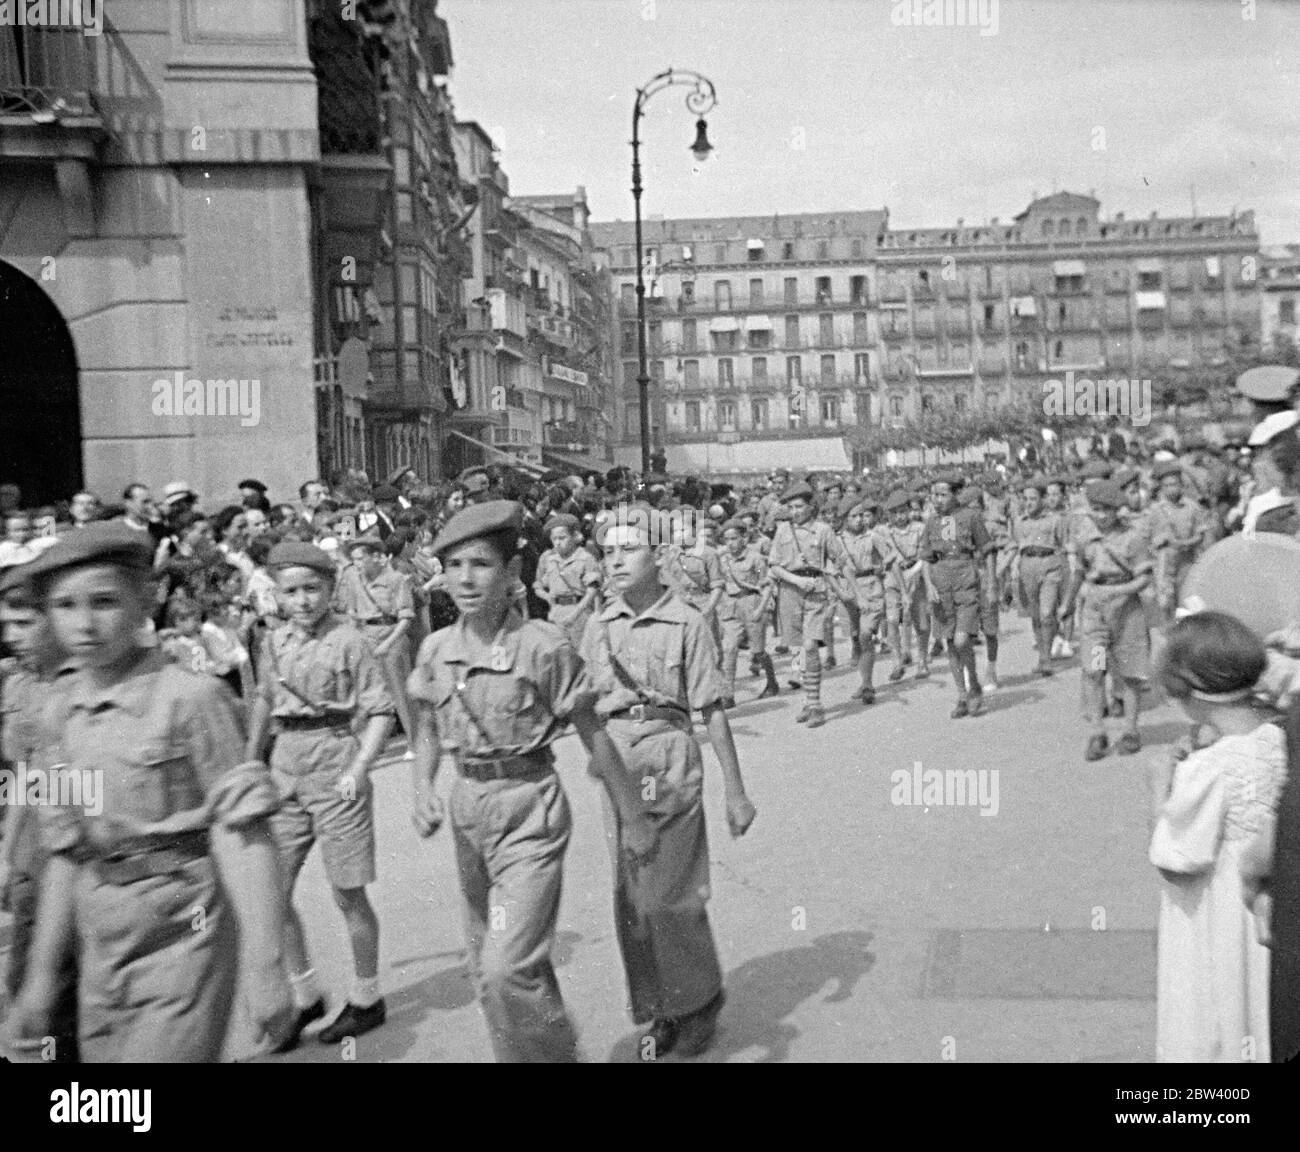 The arrival of the Nationalist troops in San SebastiÃ¡n / Donostia. Photo shows: Boys in uniform parading through the city alongside the Nationalists troops . ? September 1936 Stock Photo